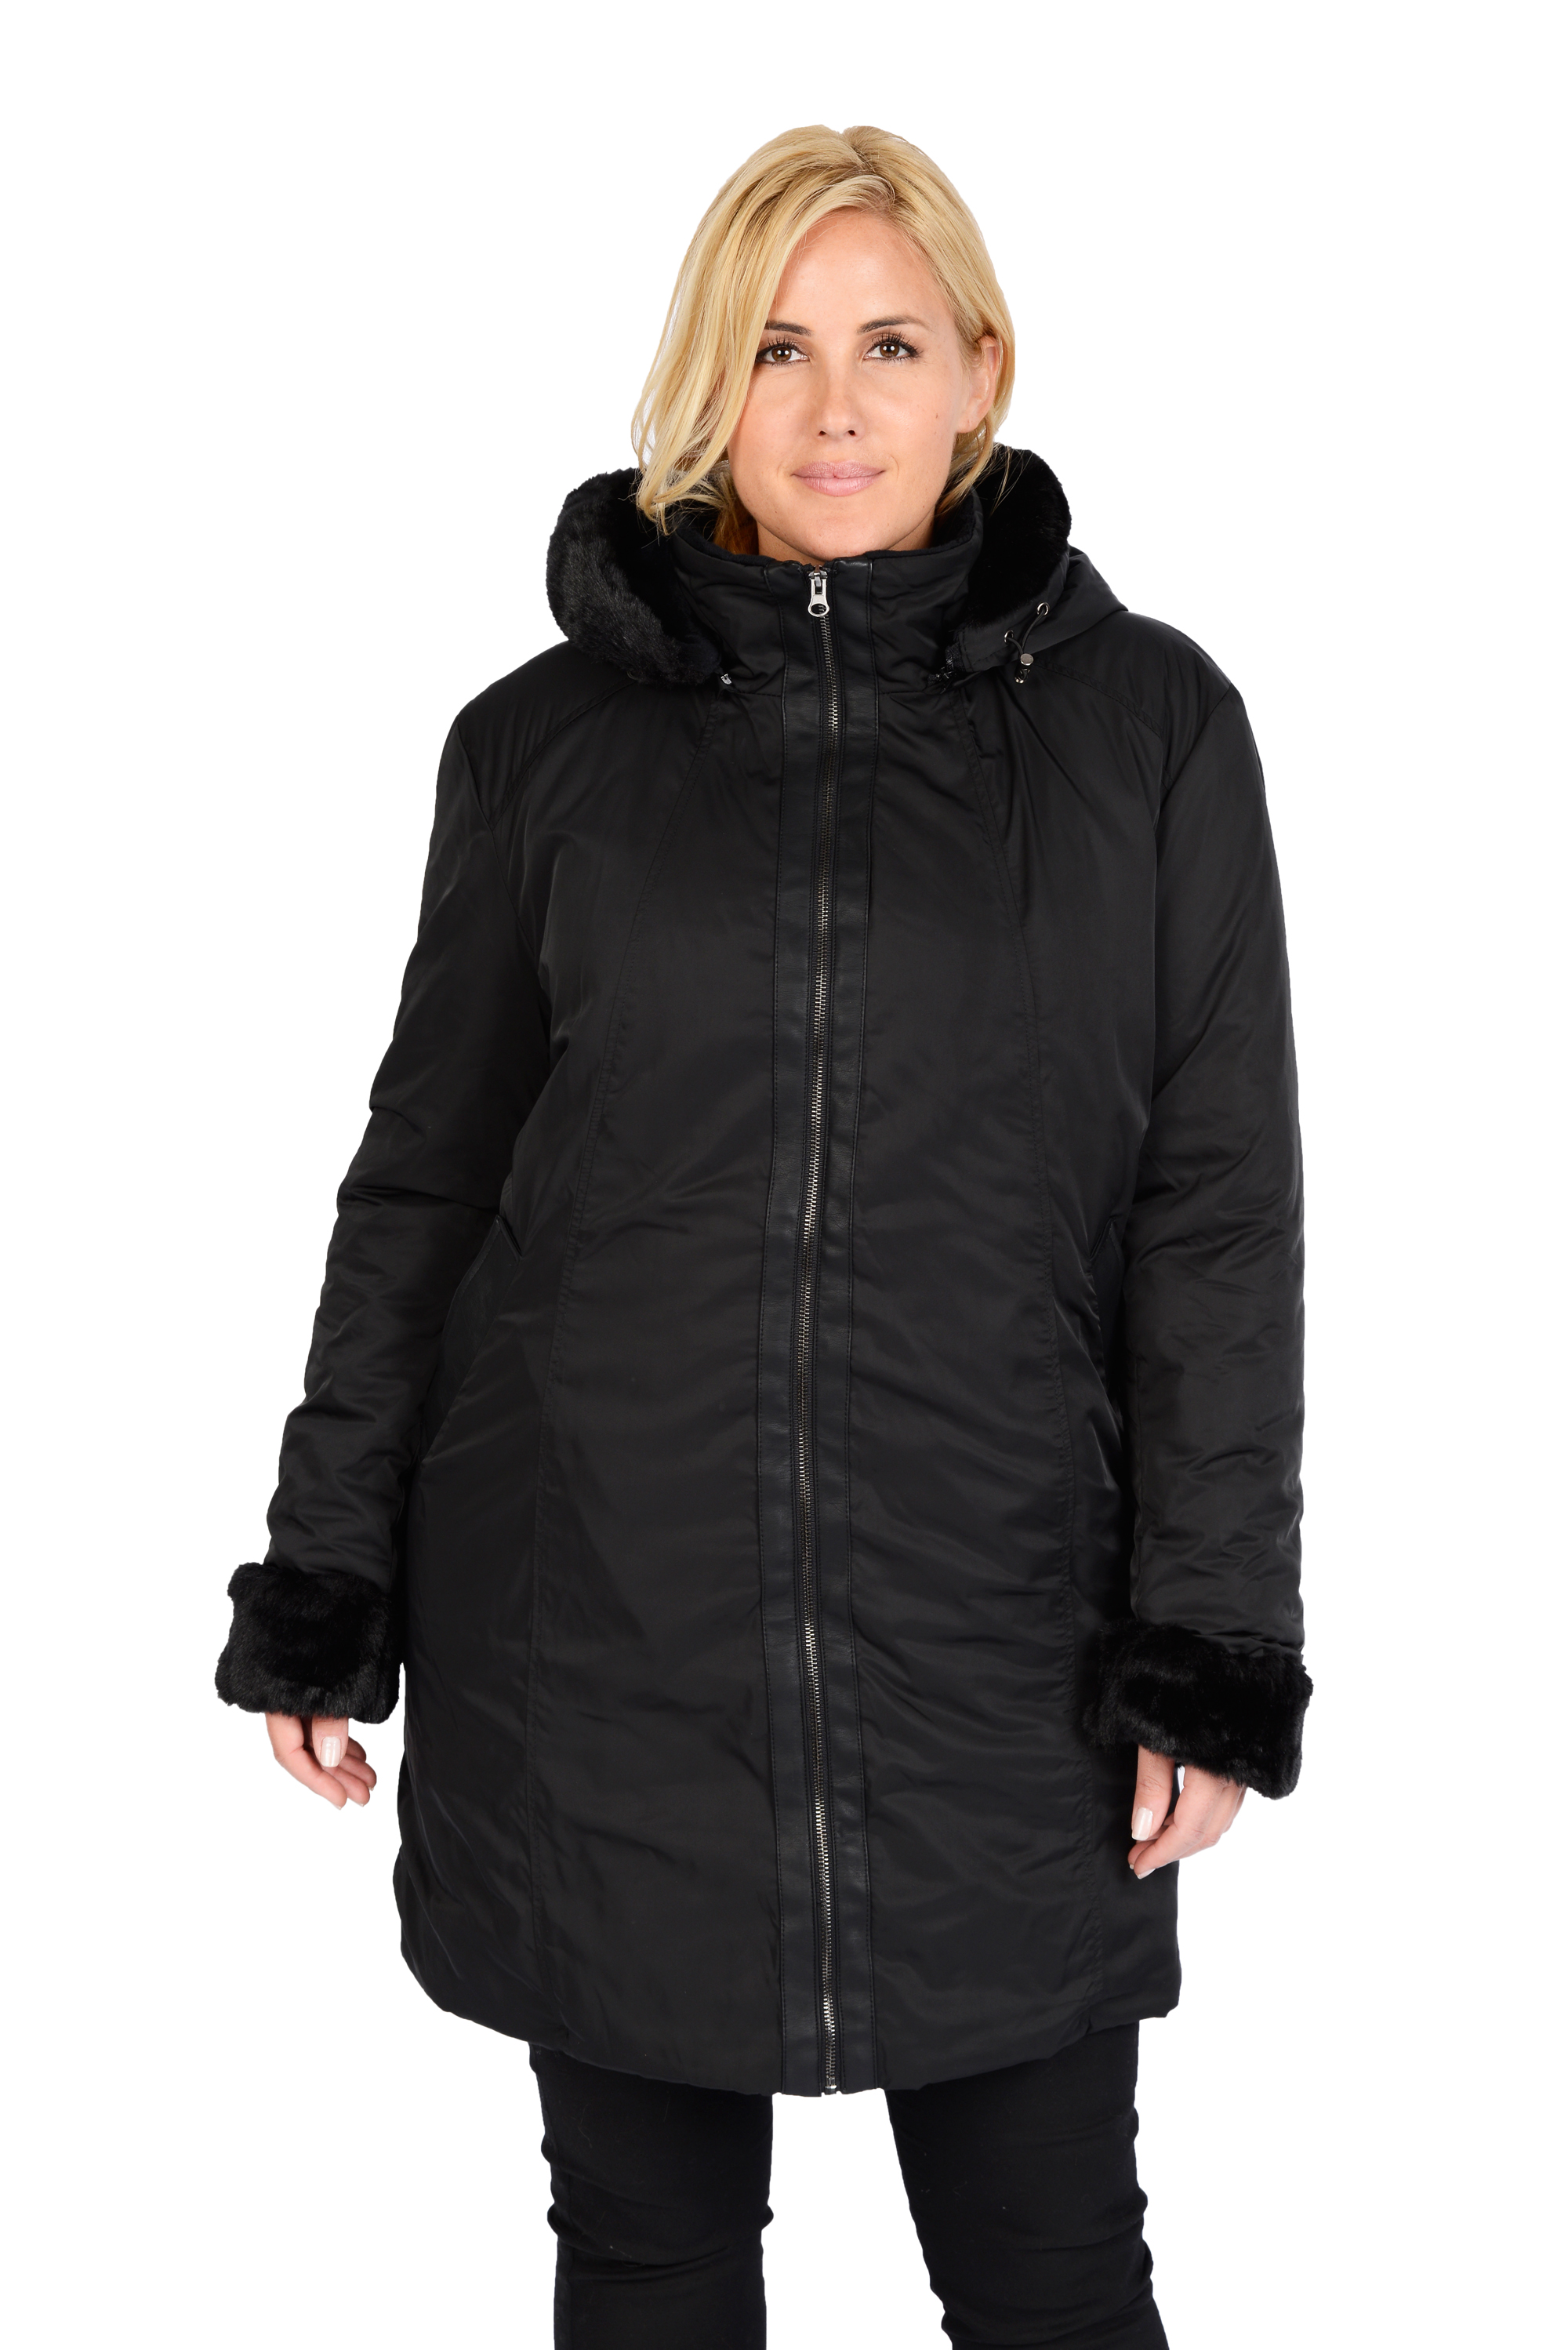 UPC 805099000265 product image for Women's Plus Polyester Activewear with Faux Fur Trim Hood and Cuffs | upcitemdb.com